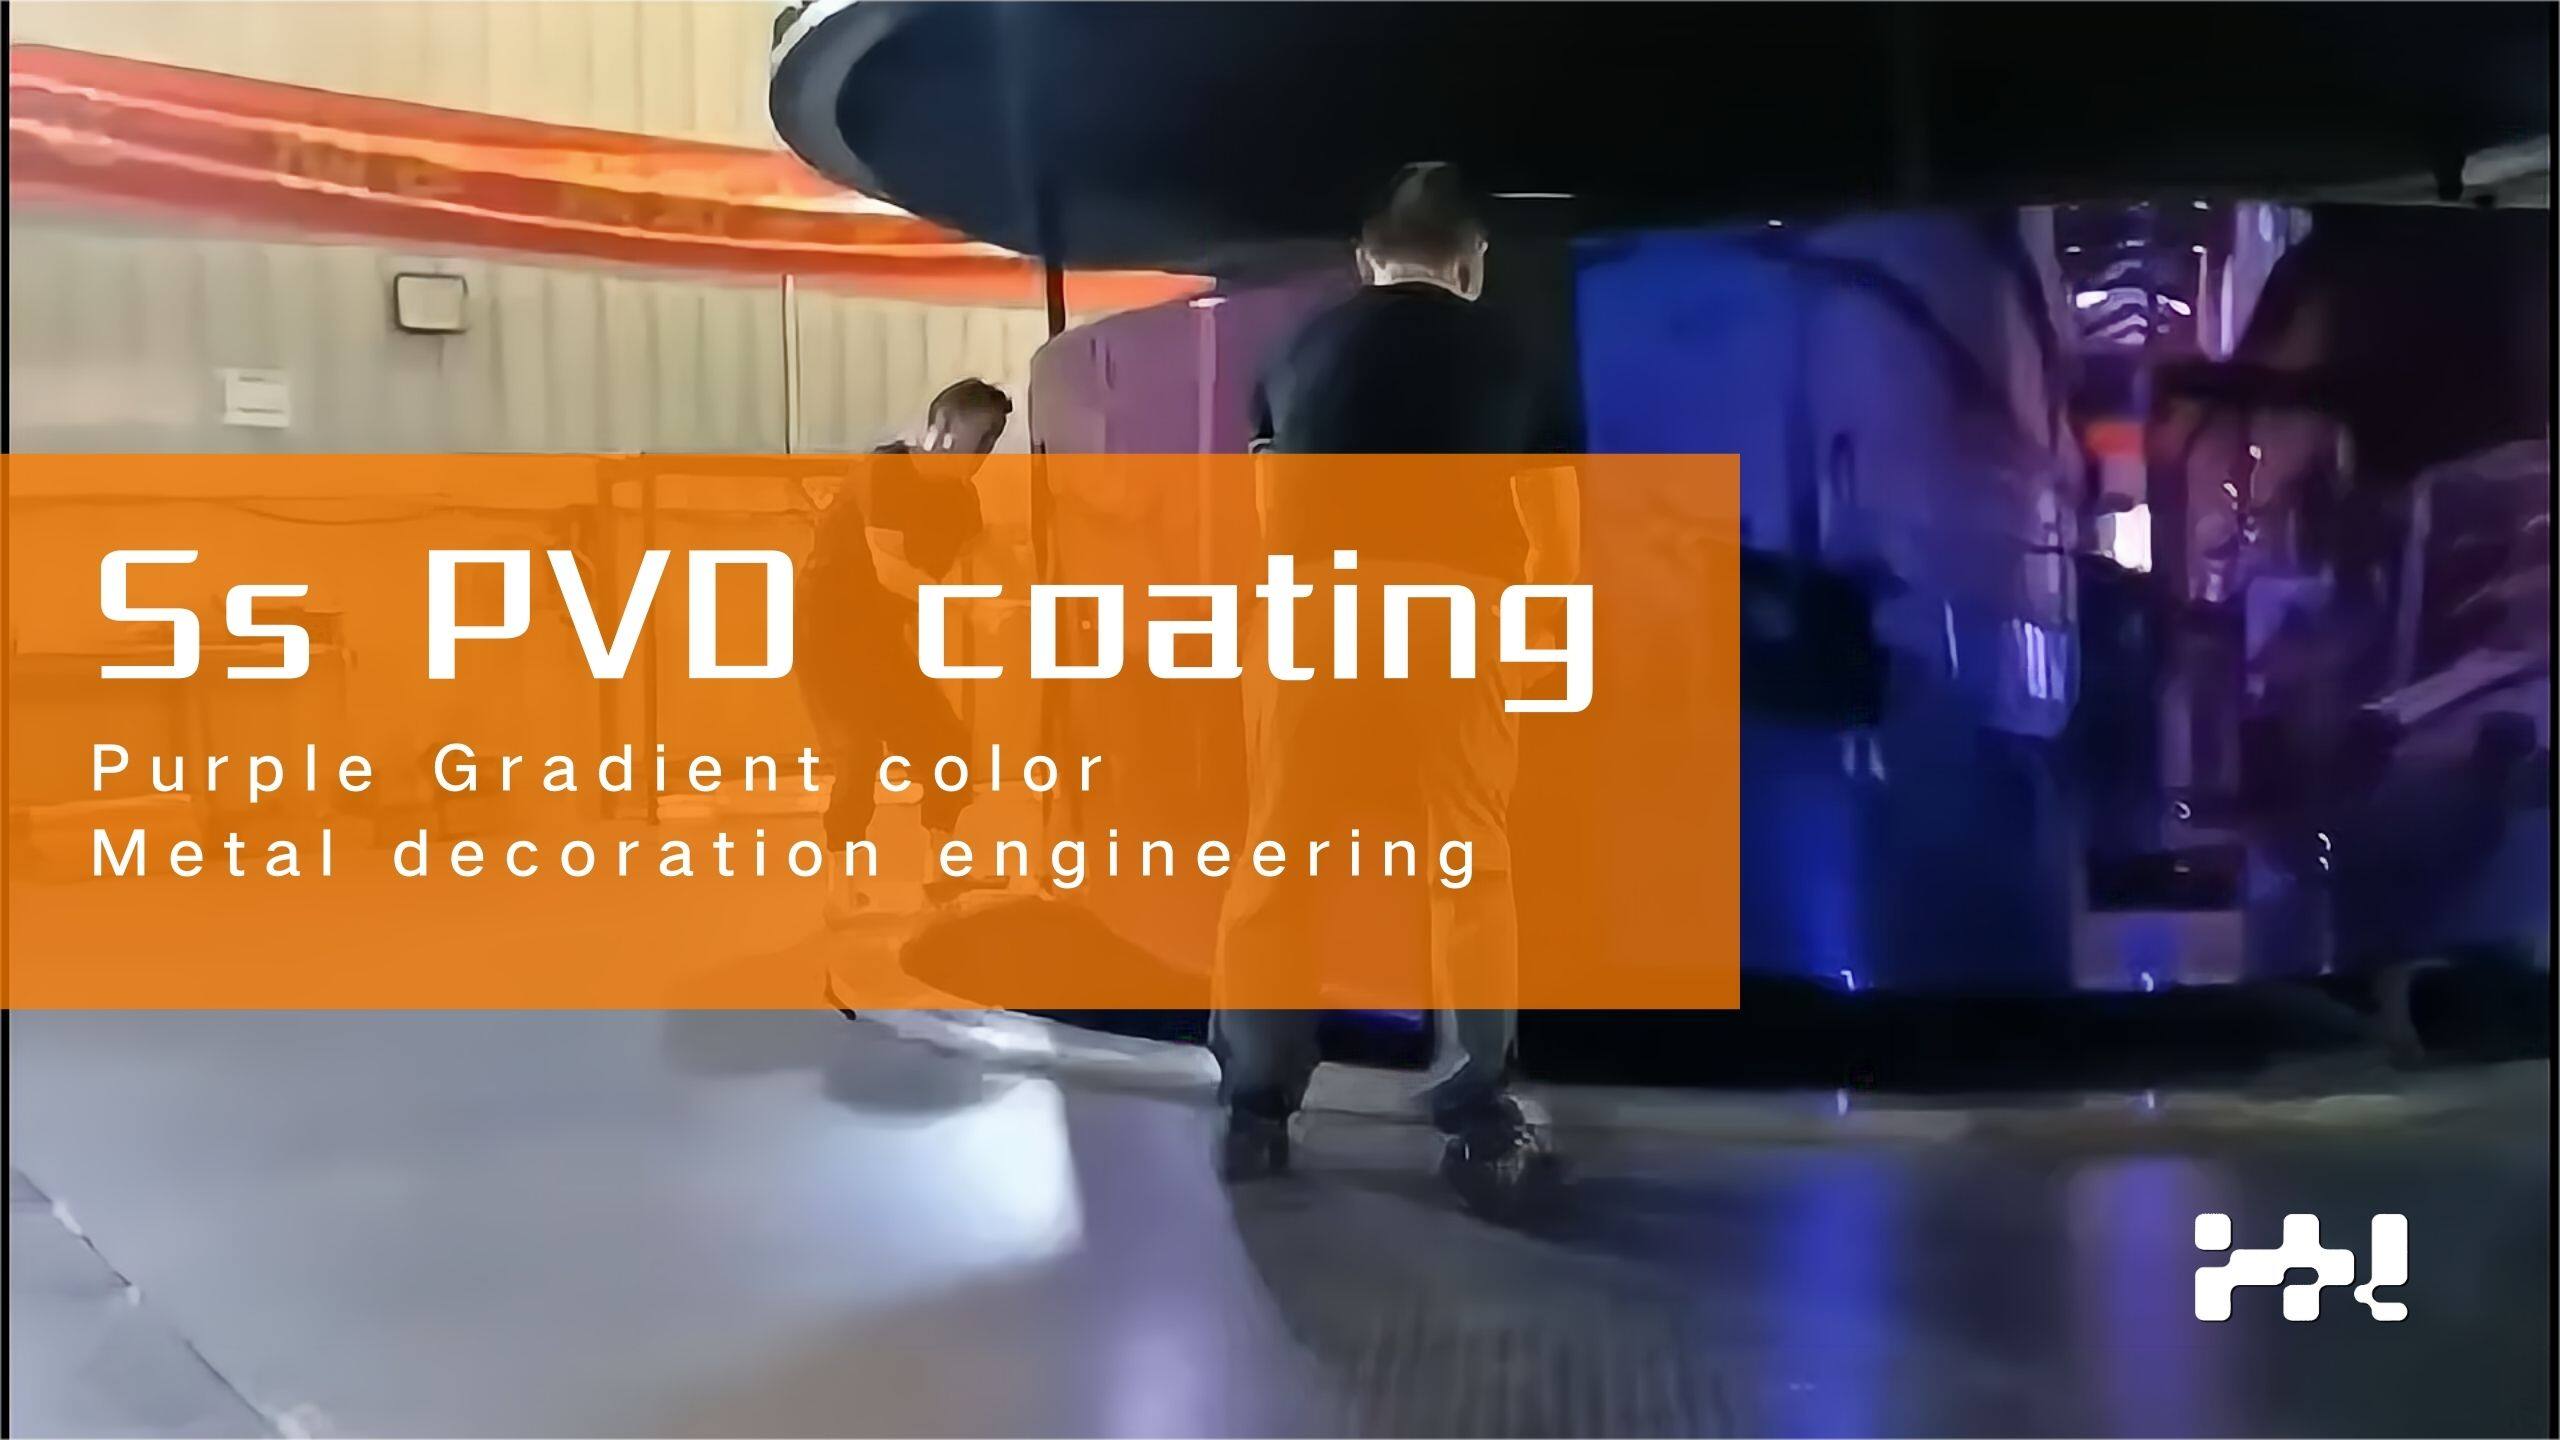 Stainless steel pvd coating